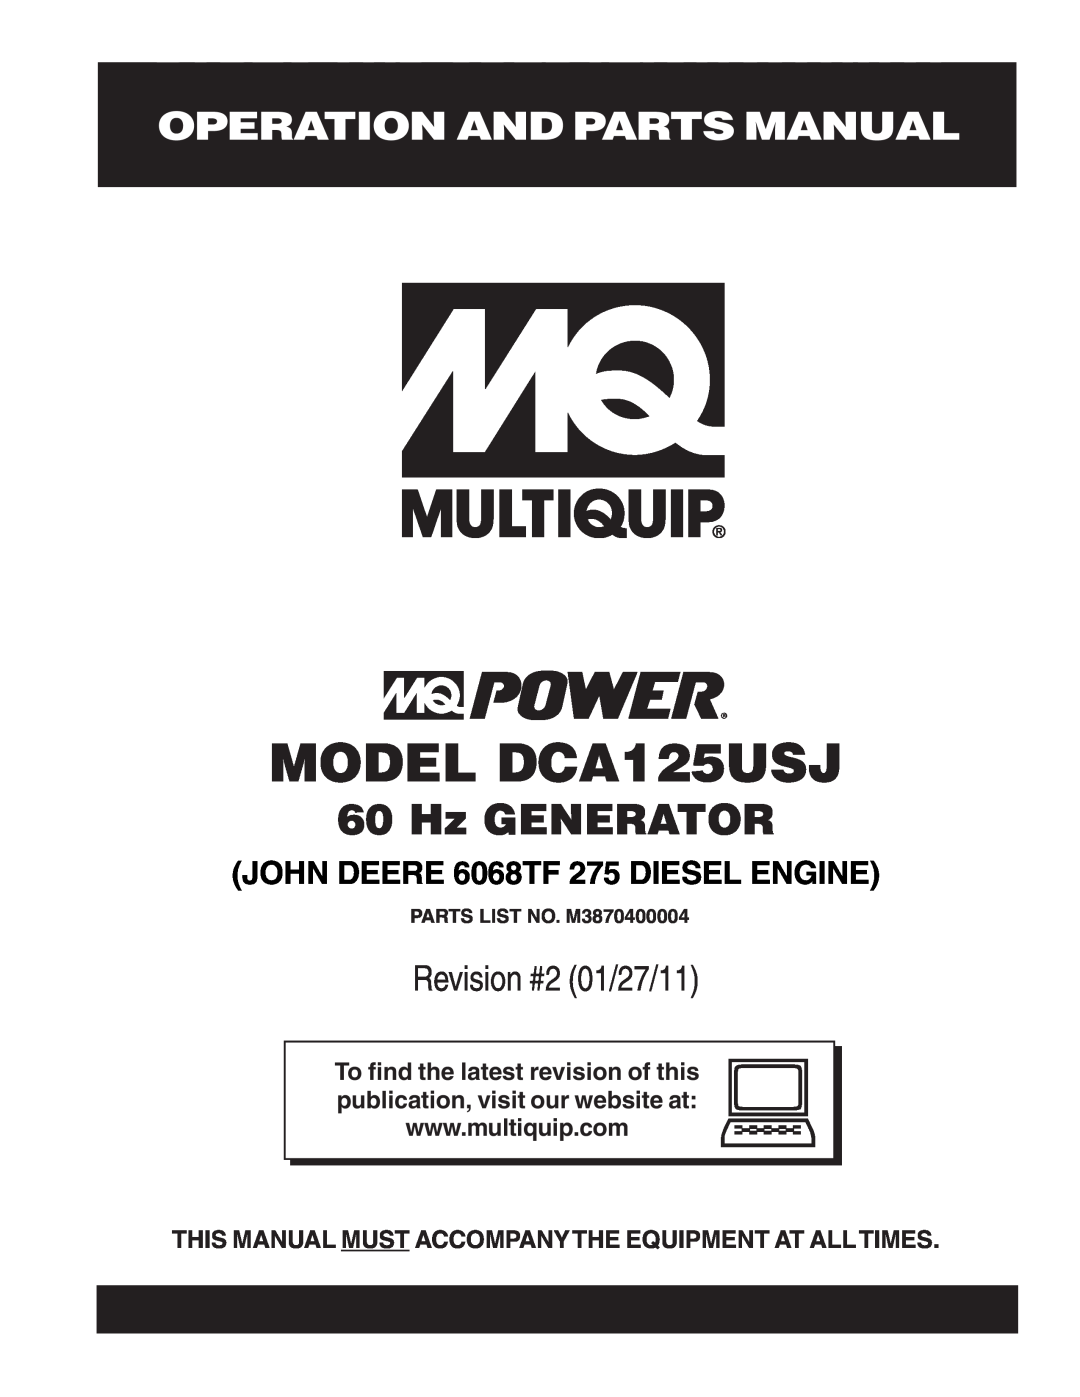 Multiquip operation manual Operation And Parts Manual, MODEL DCA125USJ, Hz GENERATOR, Revision #2 01/27/11 